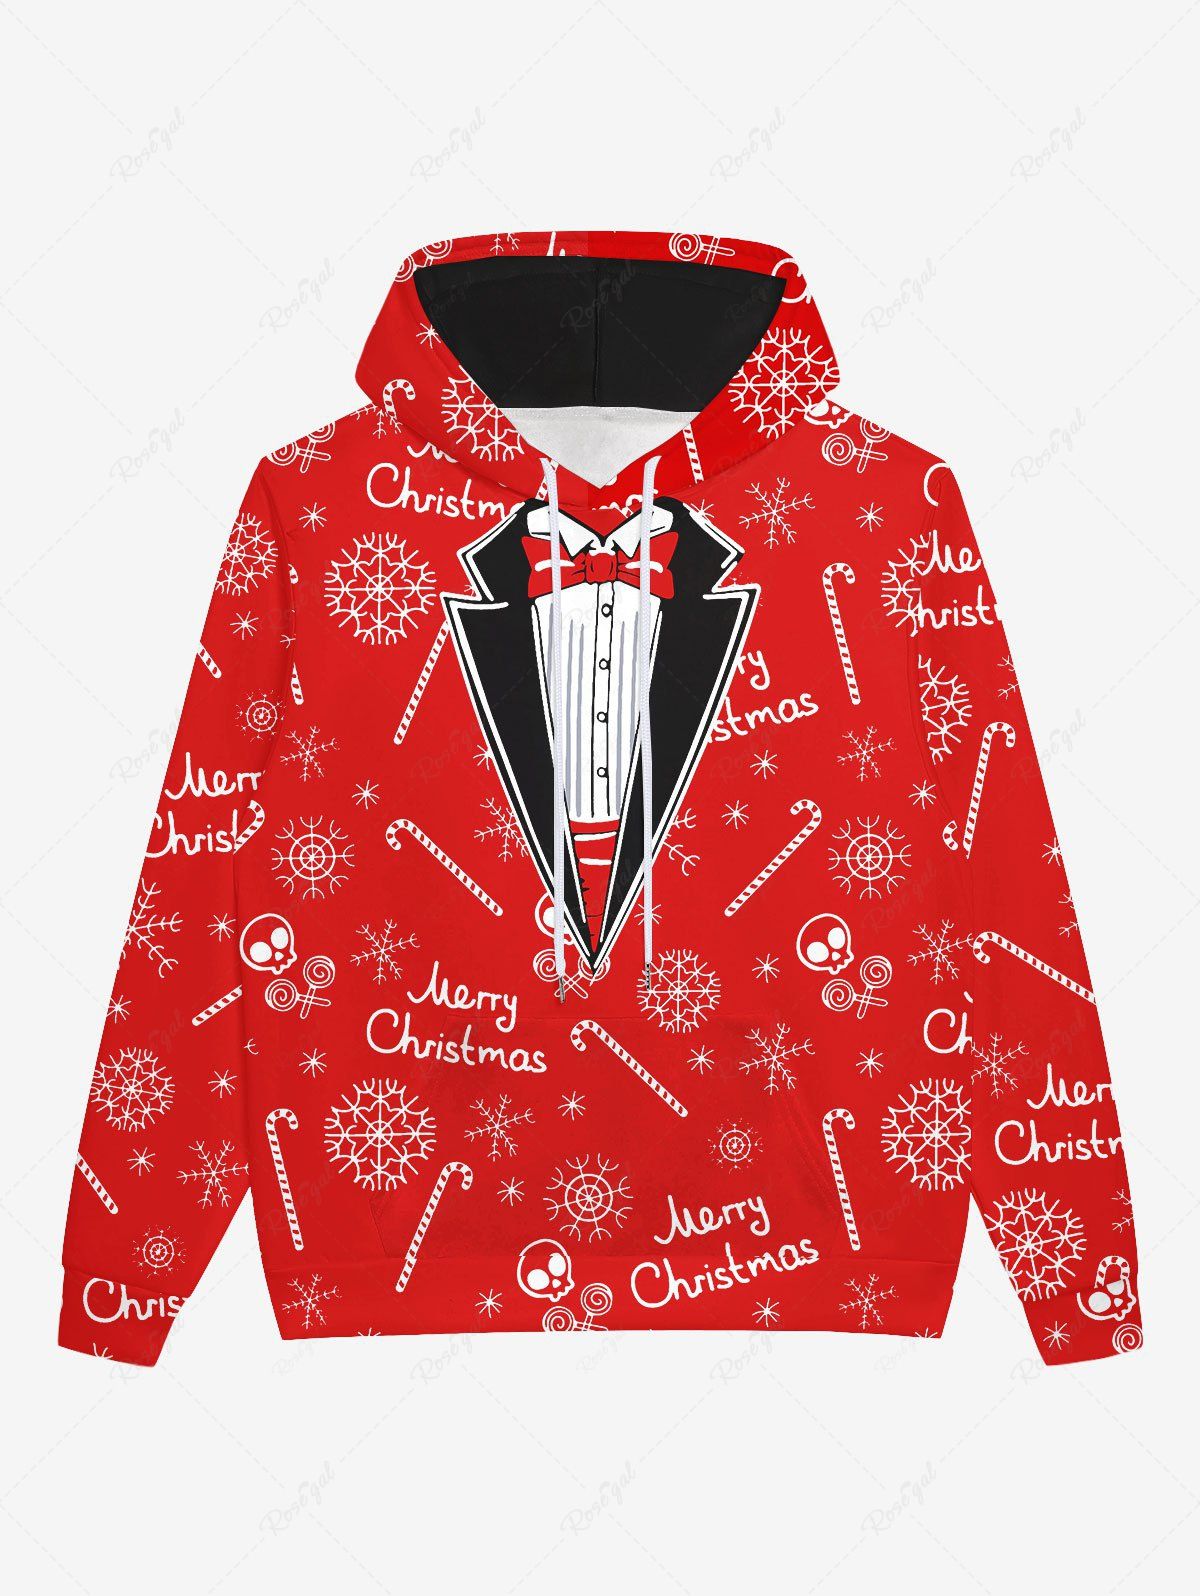 Store Gothic Christmas Snowflake Skull Bow Tie 3D Print Fleece Lining Hoodie For Men  